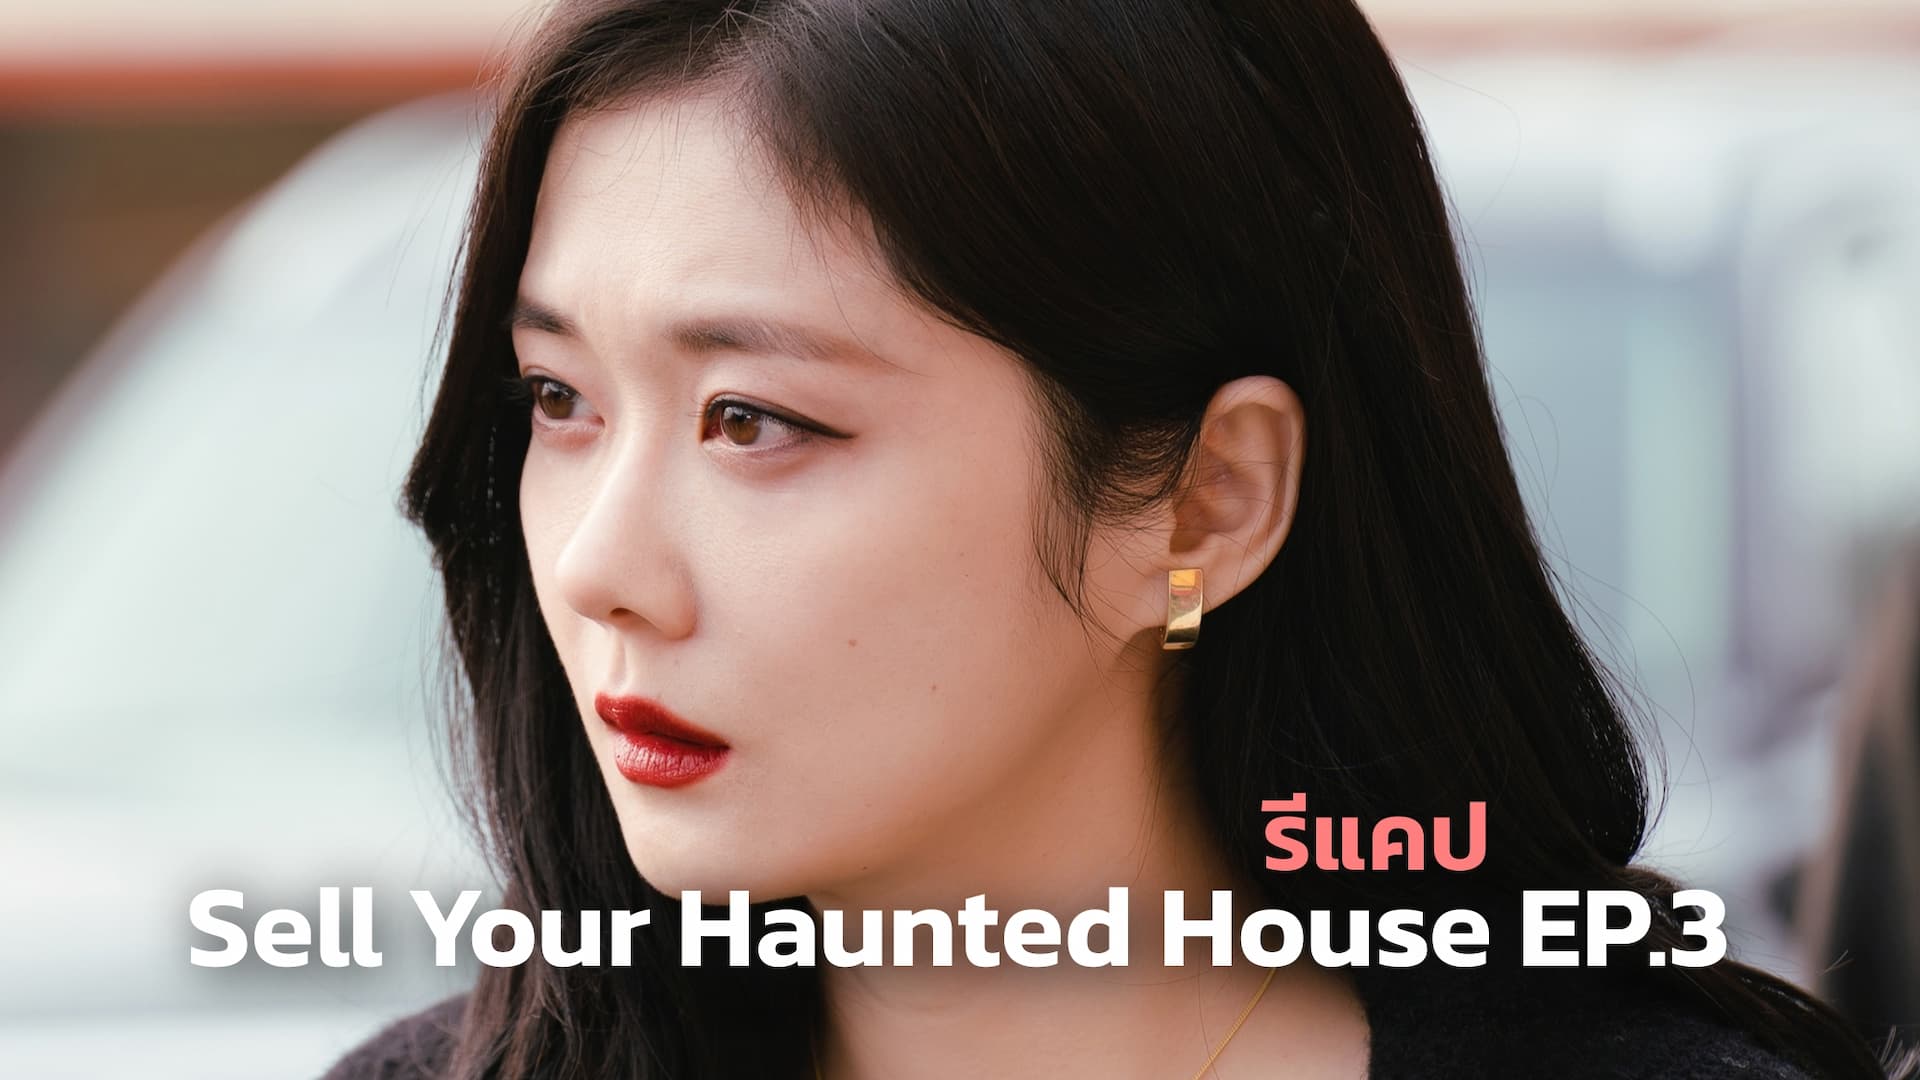 Your haunted house ep 3 sell Sell Your